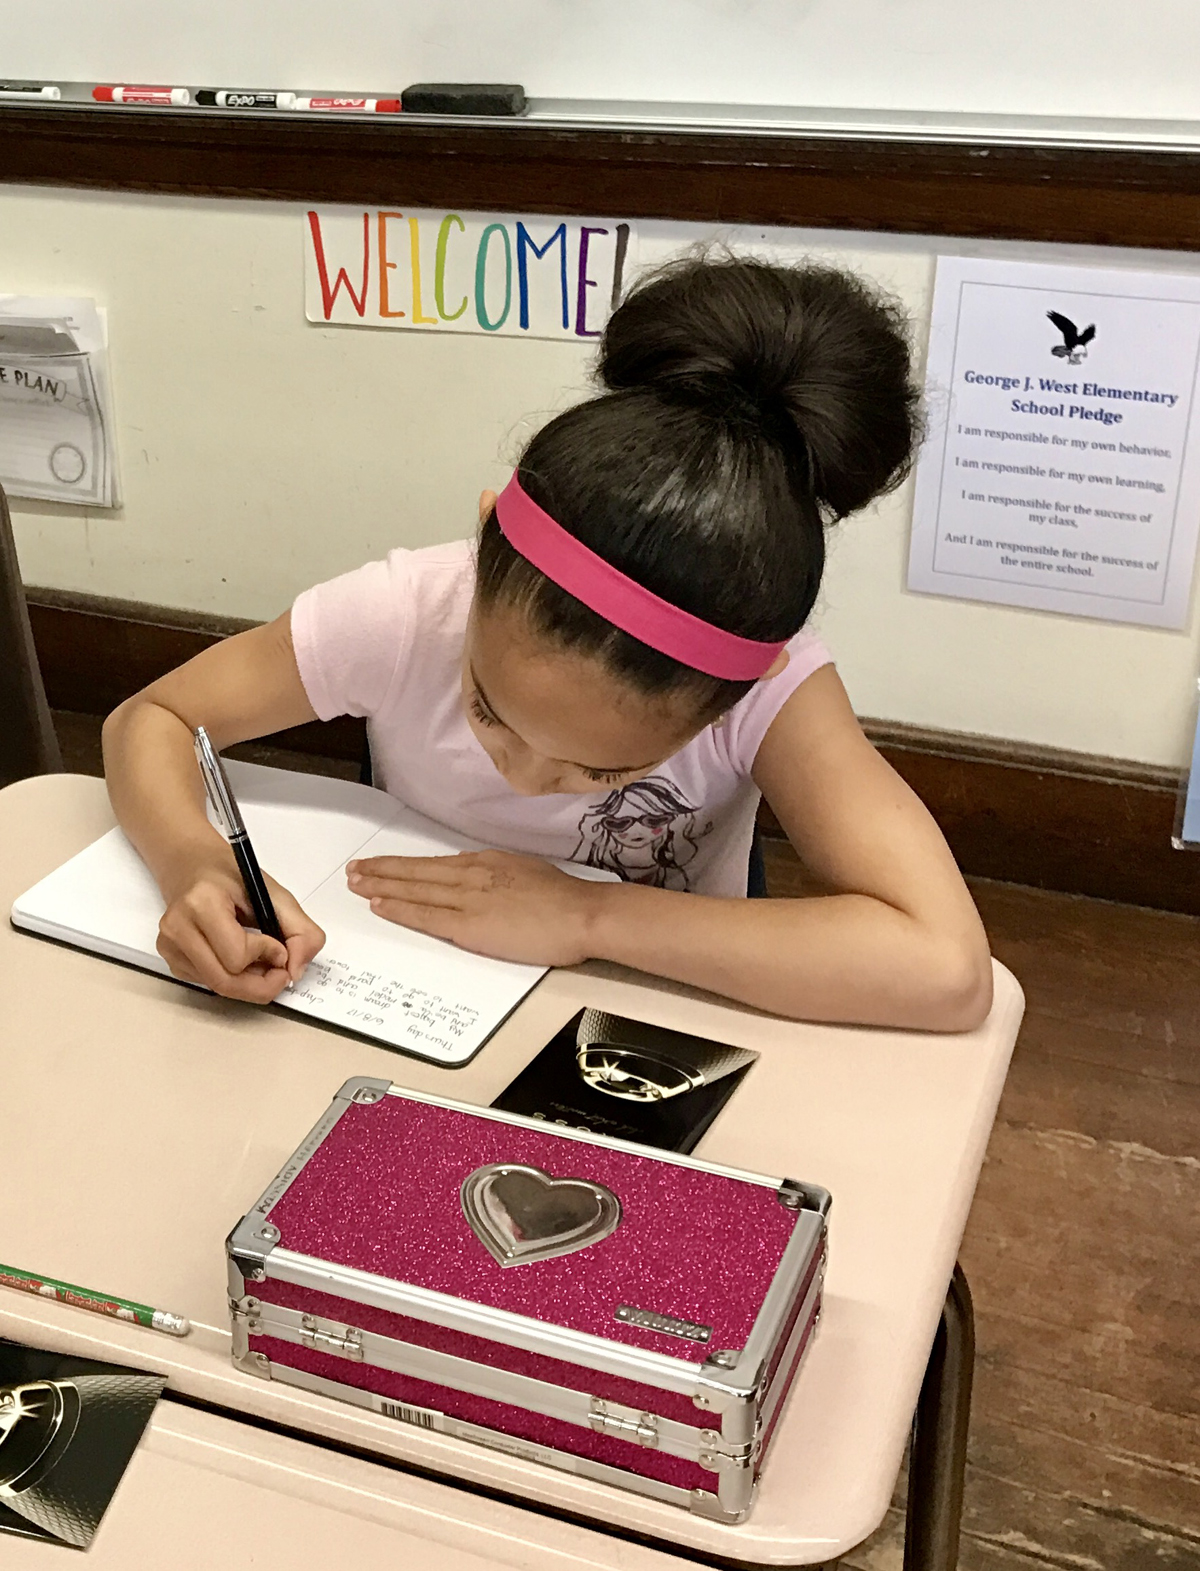 TO AVOID LOSS of reading skills over the summer months while out of school, writing tools manufacturer A.T. Cross donated 900 of their ballpoint pens and lined journals with pen holders to students at George J. West Elementary School in Providence during the school's Reading Week. Pictured, a student from Tracie Gagnon's second-grade class writes in her journal. /COURTESY A.T. CROSS